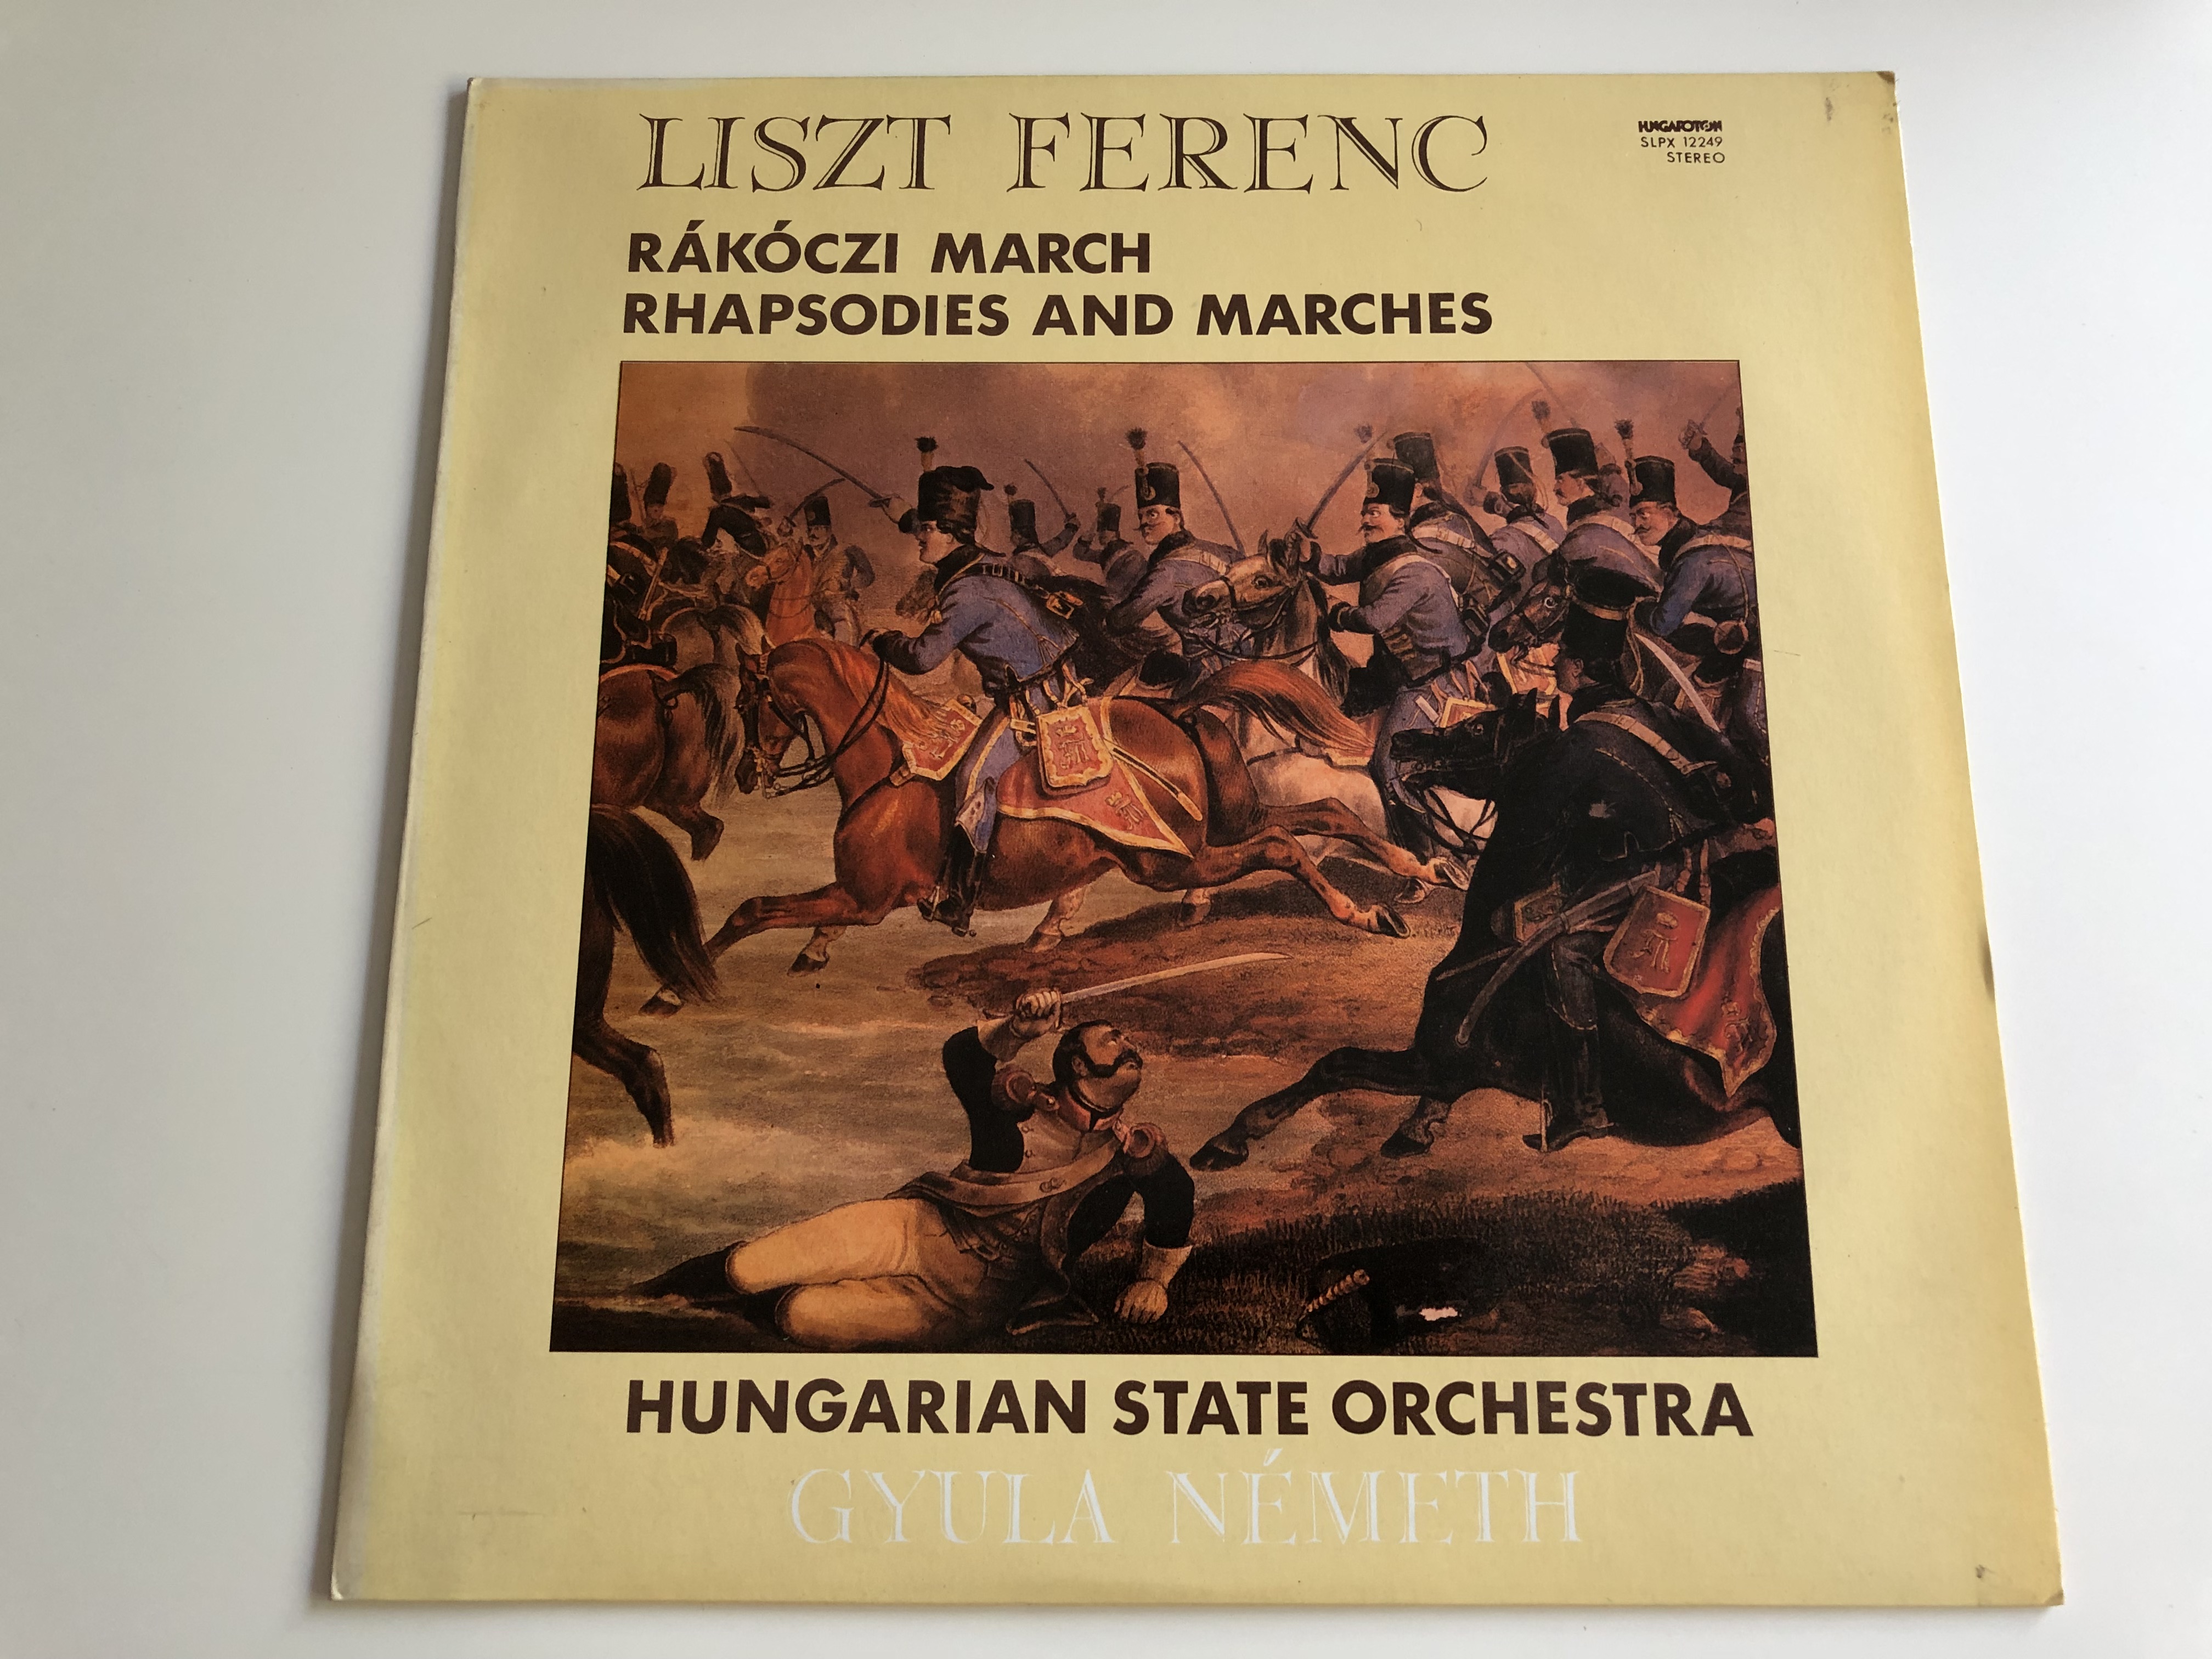 liszt-ferenc-r-k-czi-march-rhapsodies-and-marches-conducted-gyula-n-meth-hungarian-state-orchestra-hungaroton-lp-stereo-slpx-12249-1-.jpg